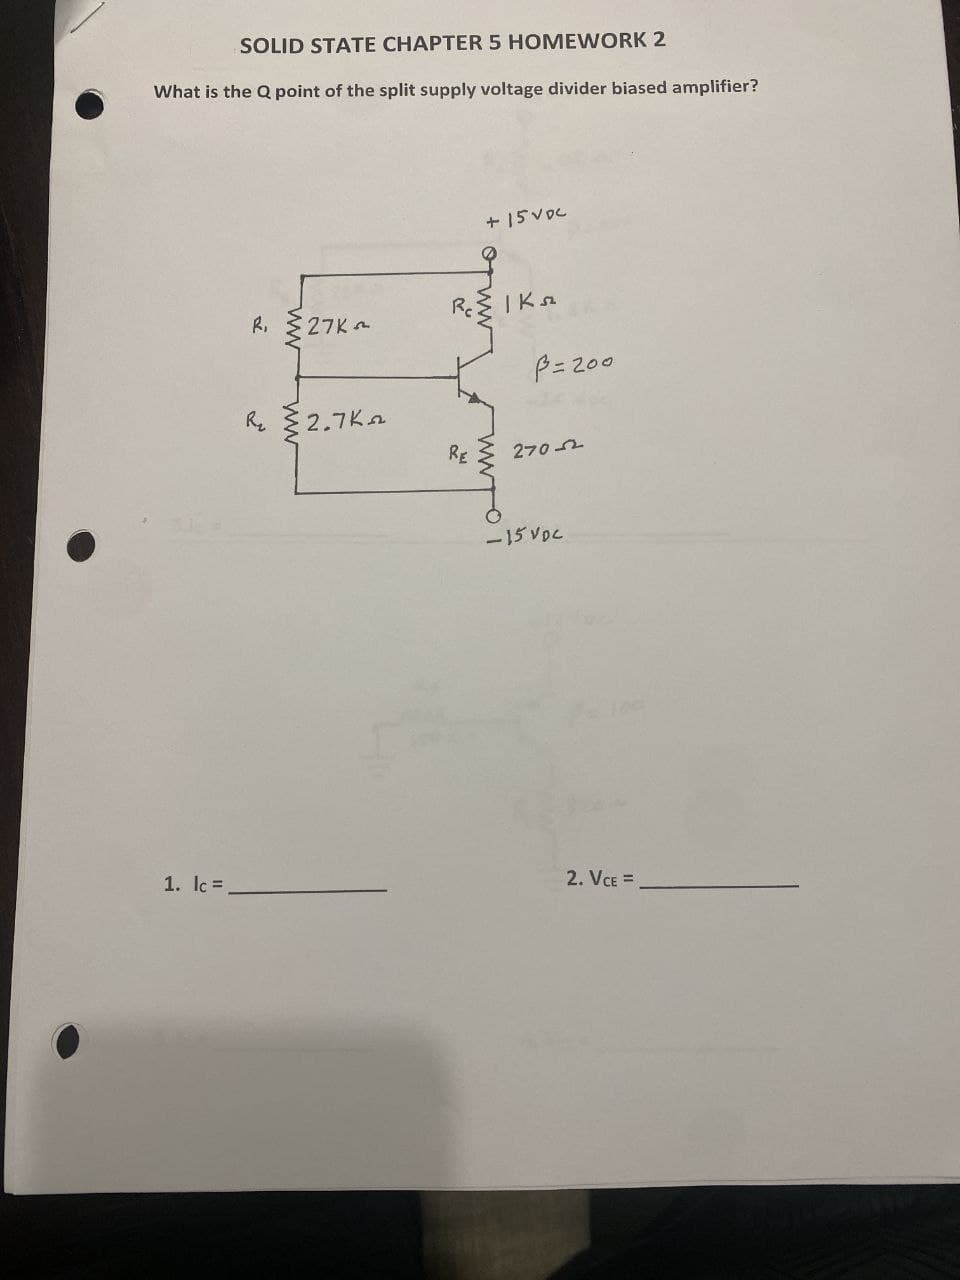 SOLID STATE CHAPTER 5 HOMEWORK 2
What is the Q point of the split supply voltage divider biased amplifier?
R,
ww
+15VDC
27K
RcIK sz
P=200
R 2.7K
RE
270-2
-15 VDC
1. lc =
2. VCE =